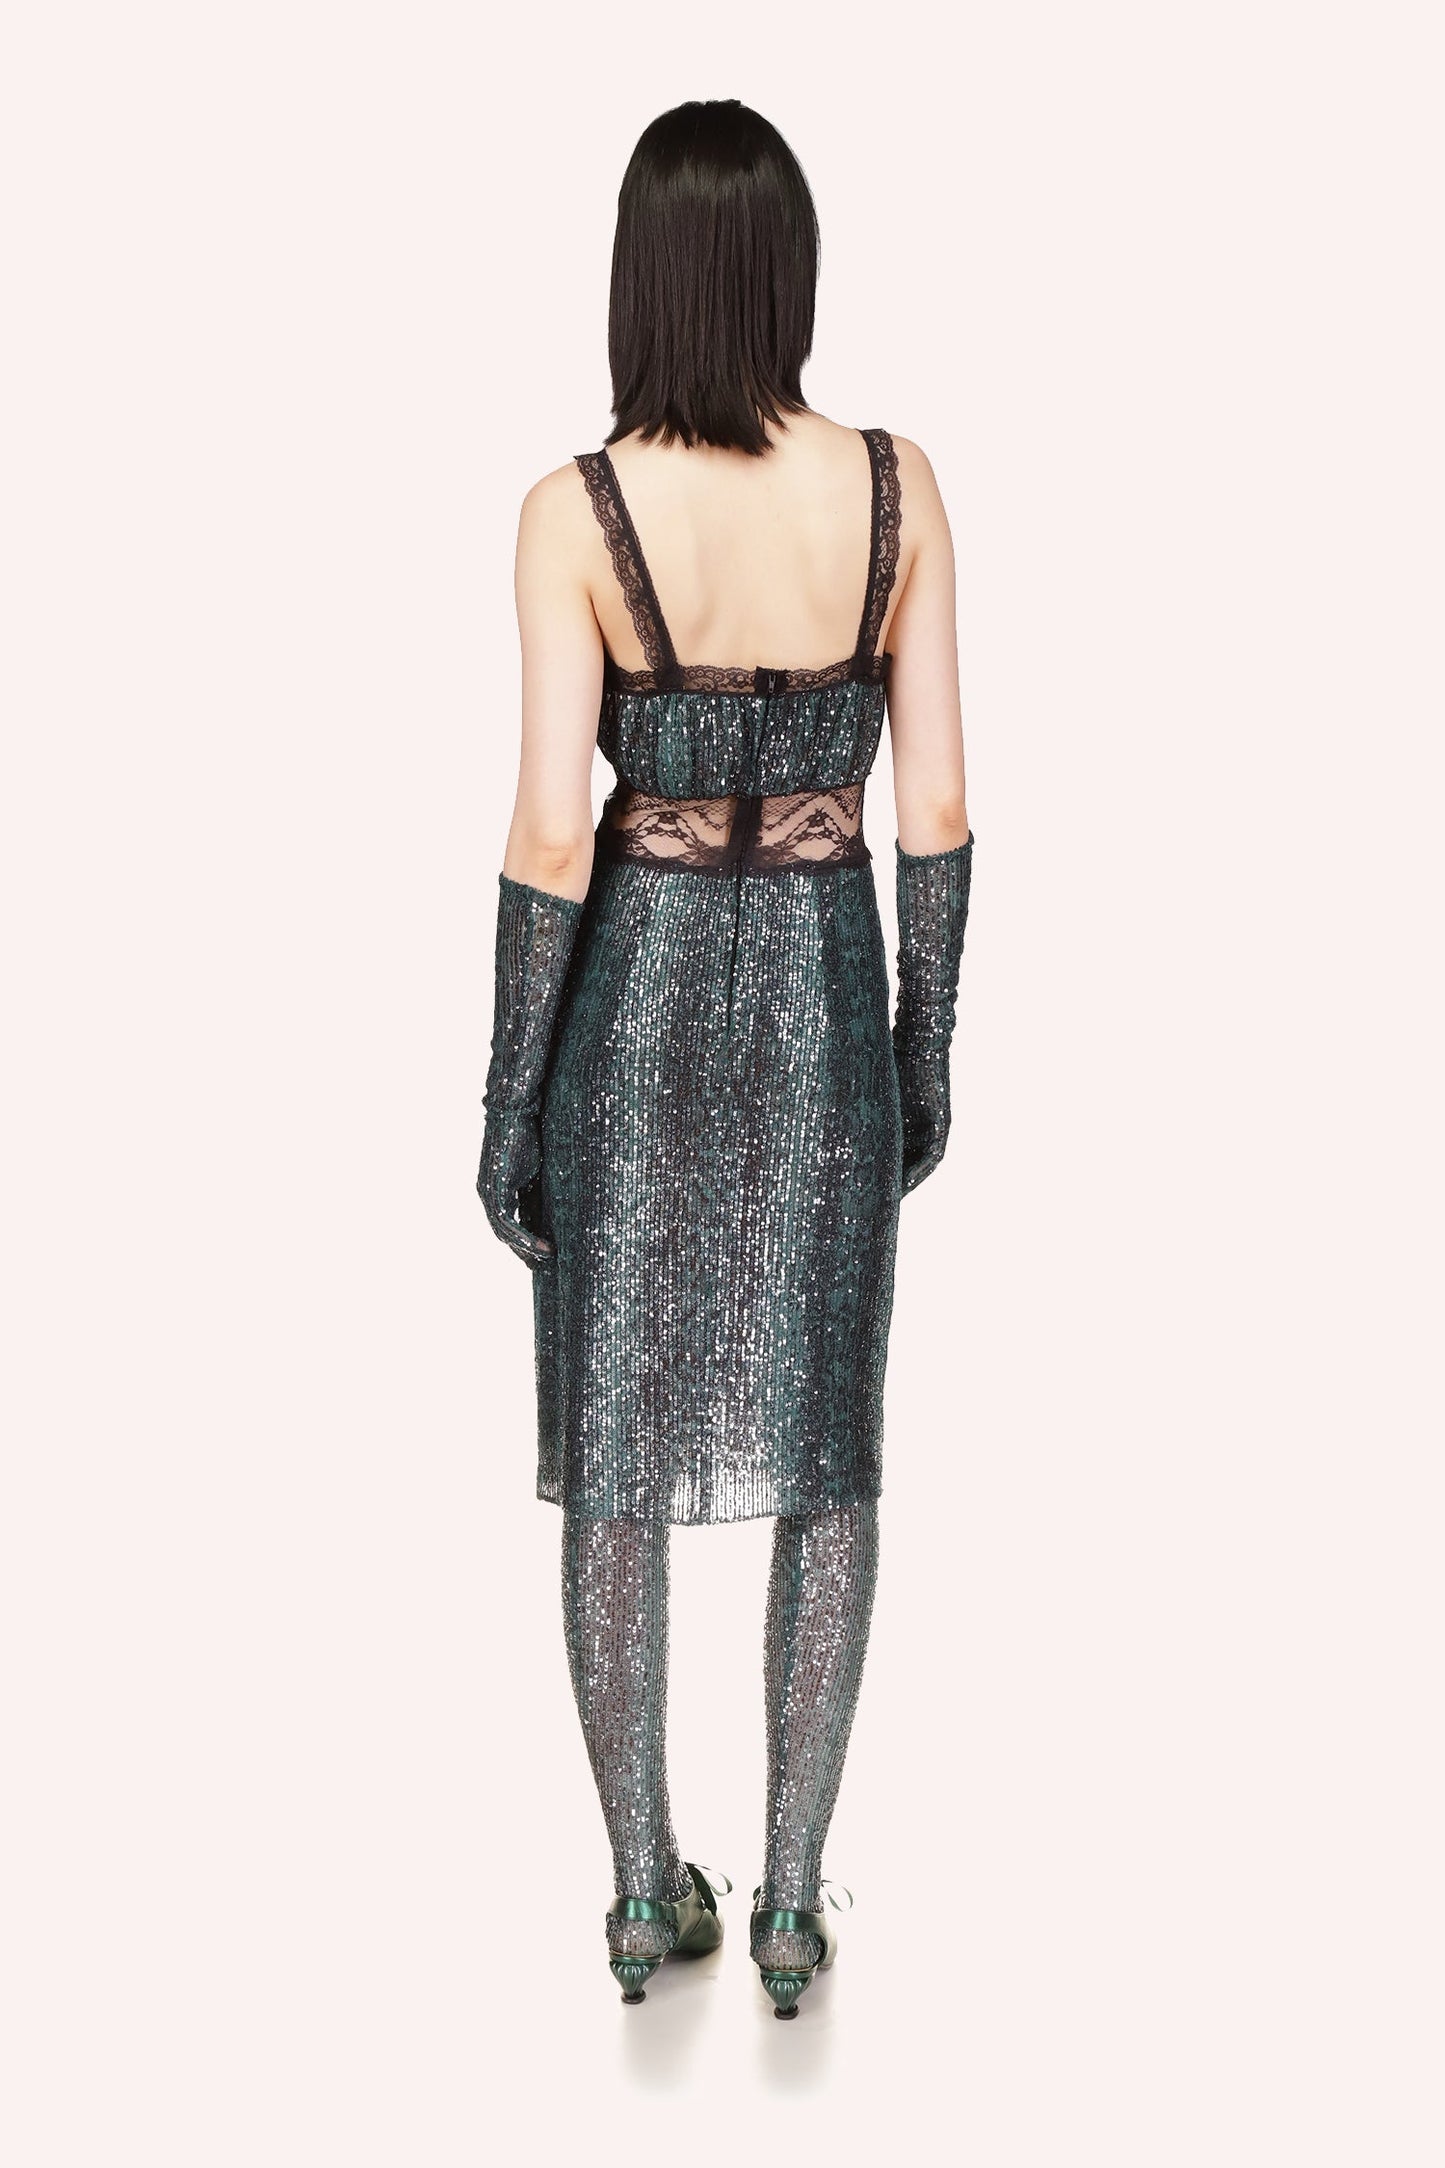 Knee-length dress, low-cut in the back, large waist see-thru black lace, zipper running along spine